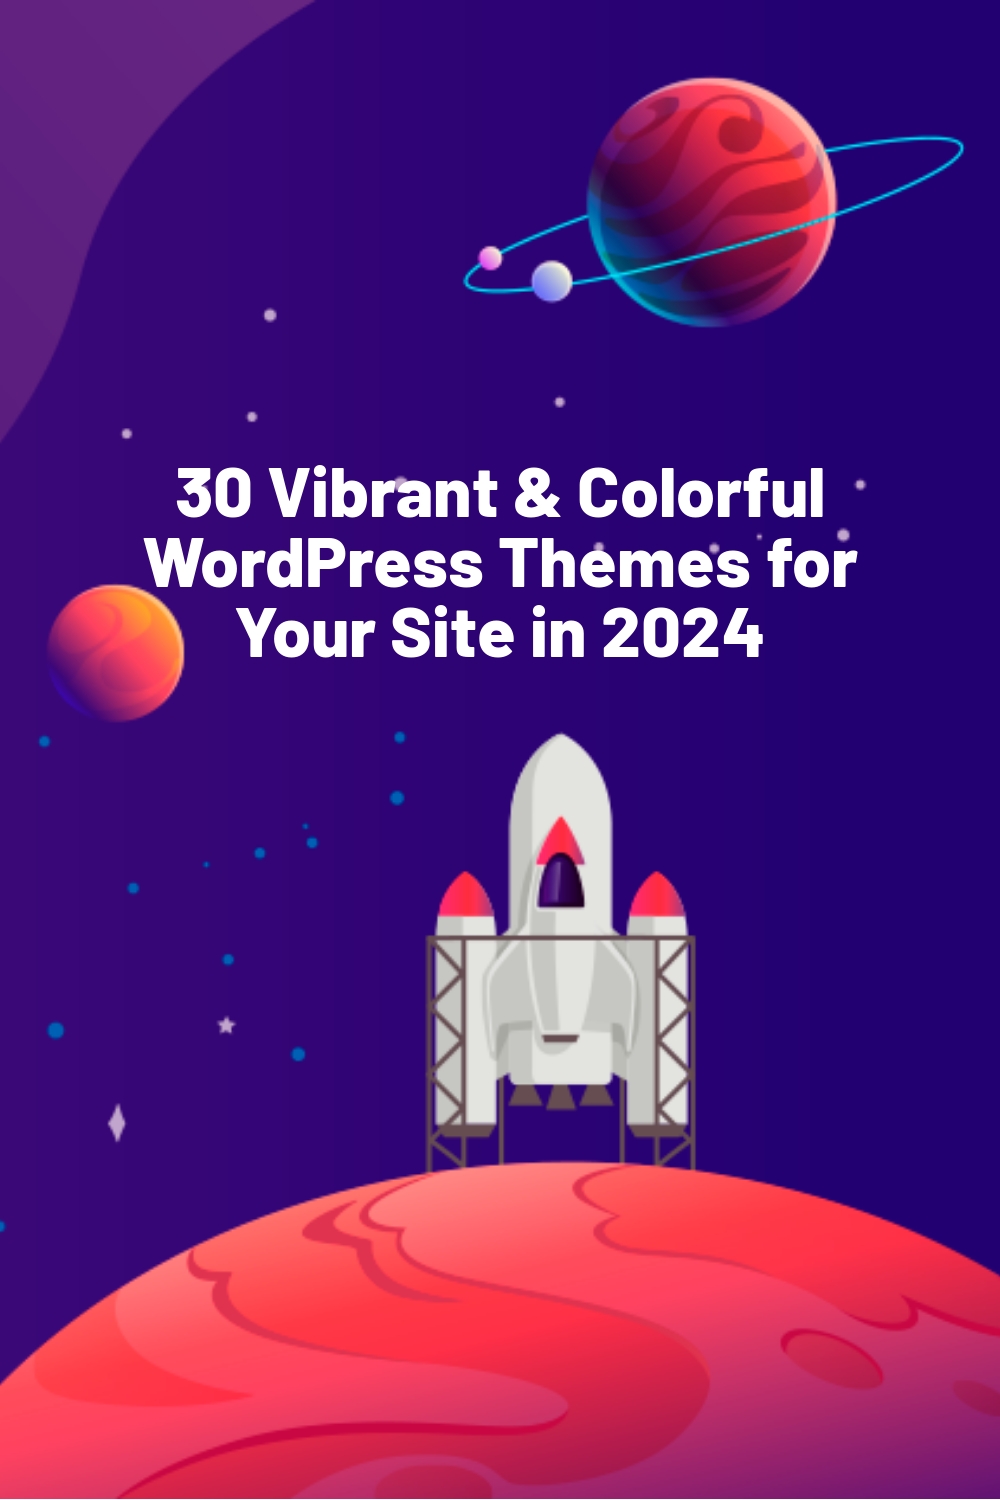 30 Vibrant & Colorful WordPress Themes for Your Site in 2024